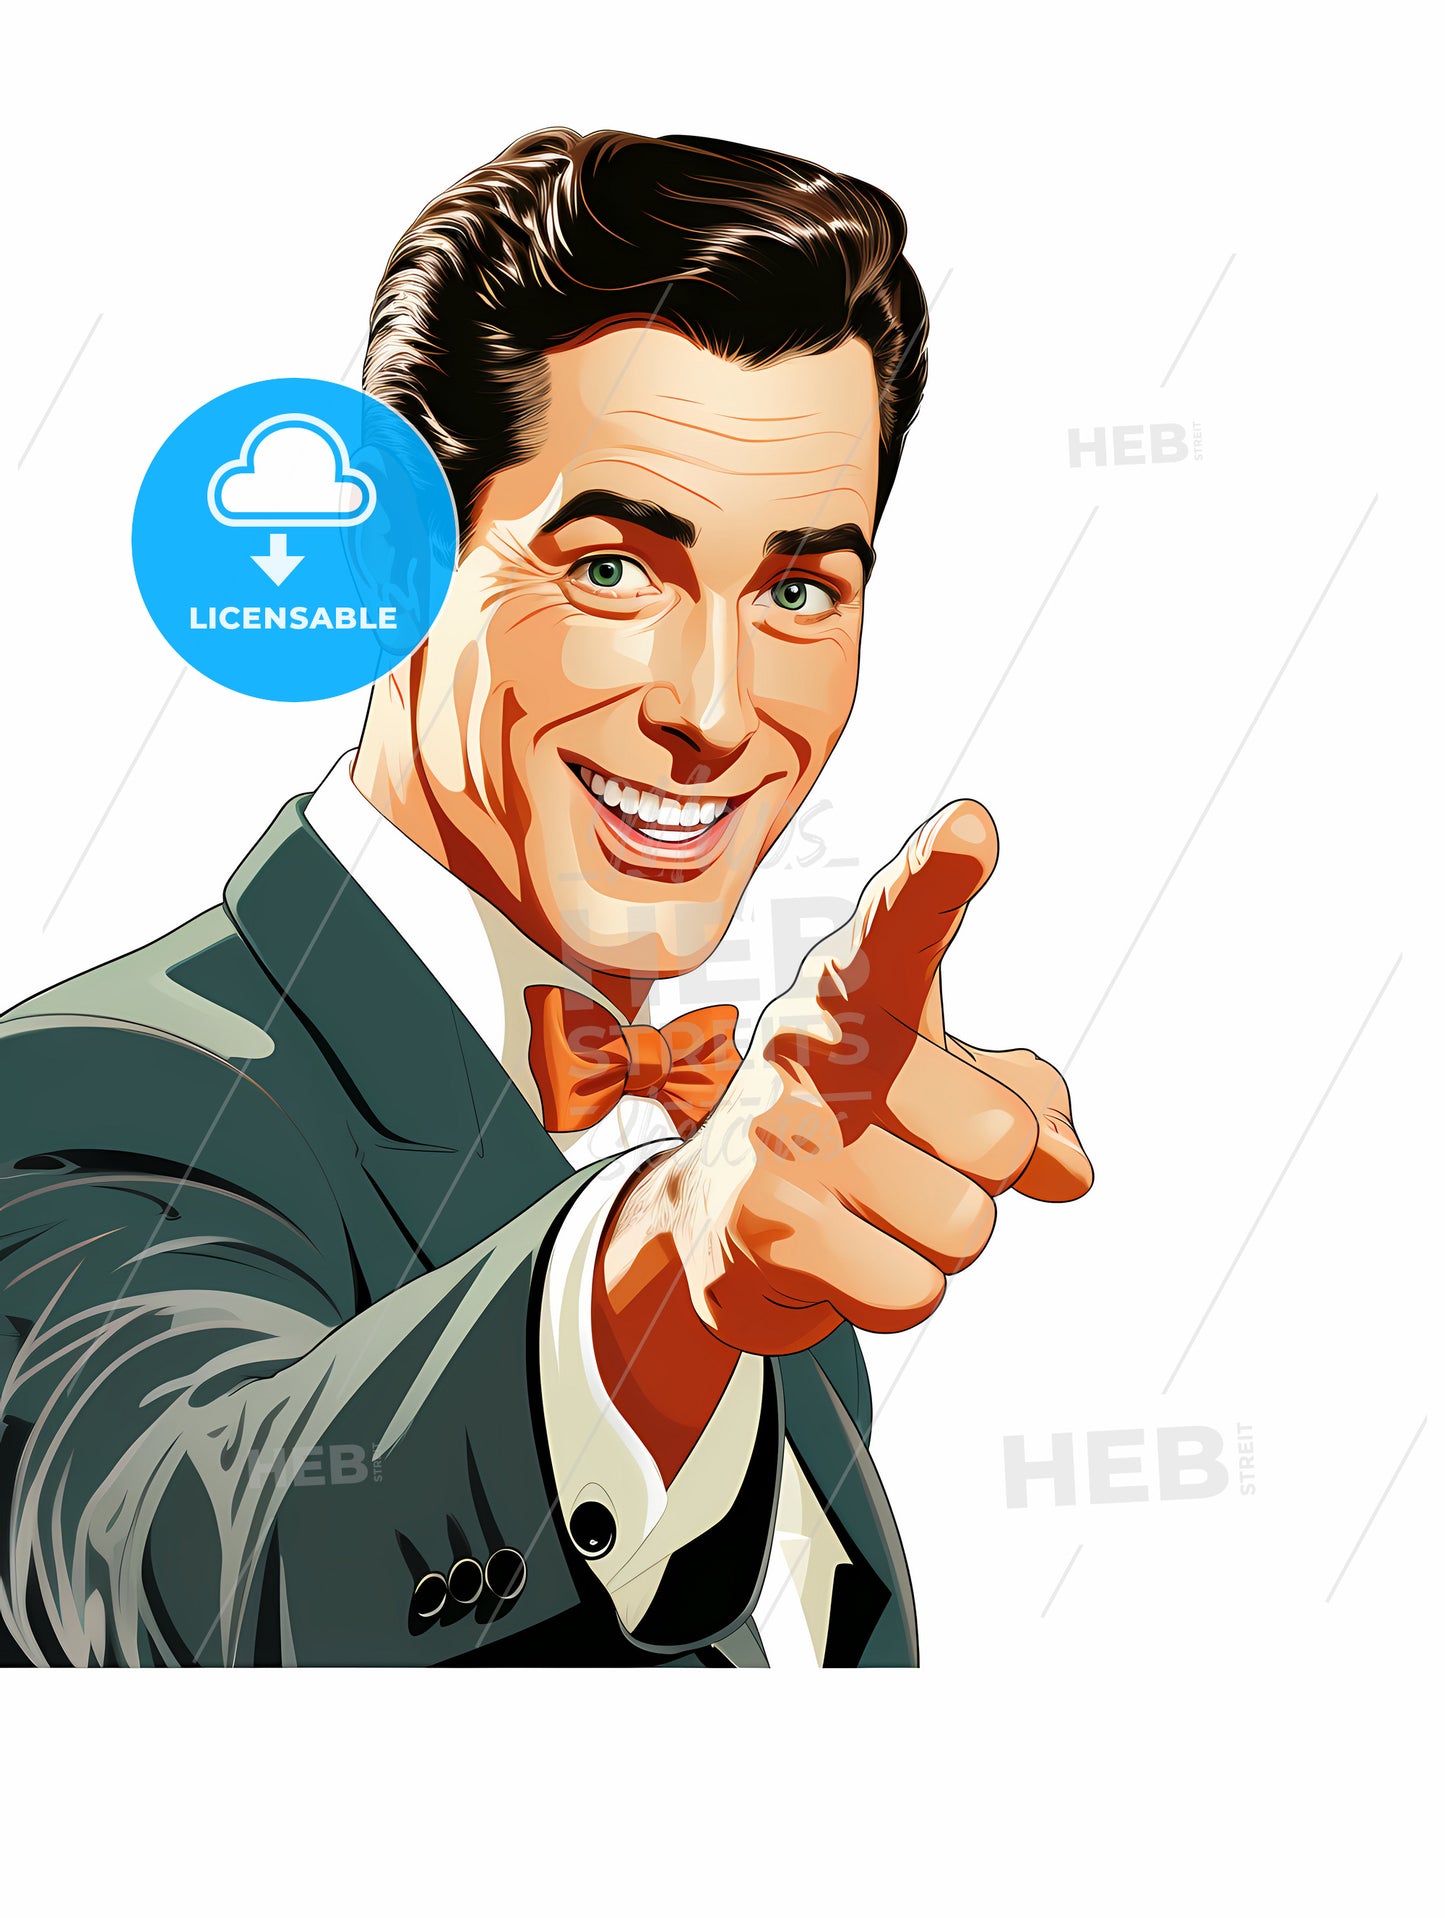 Advertising - A Man In A Suit Pointing His Finger